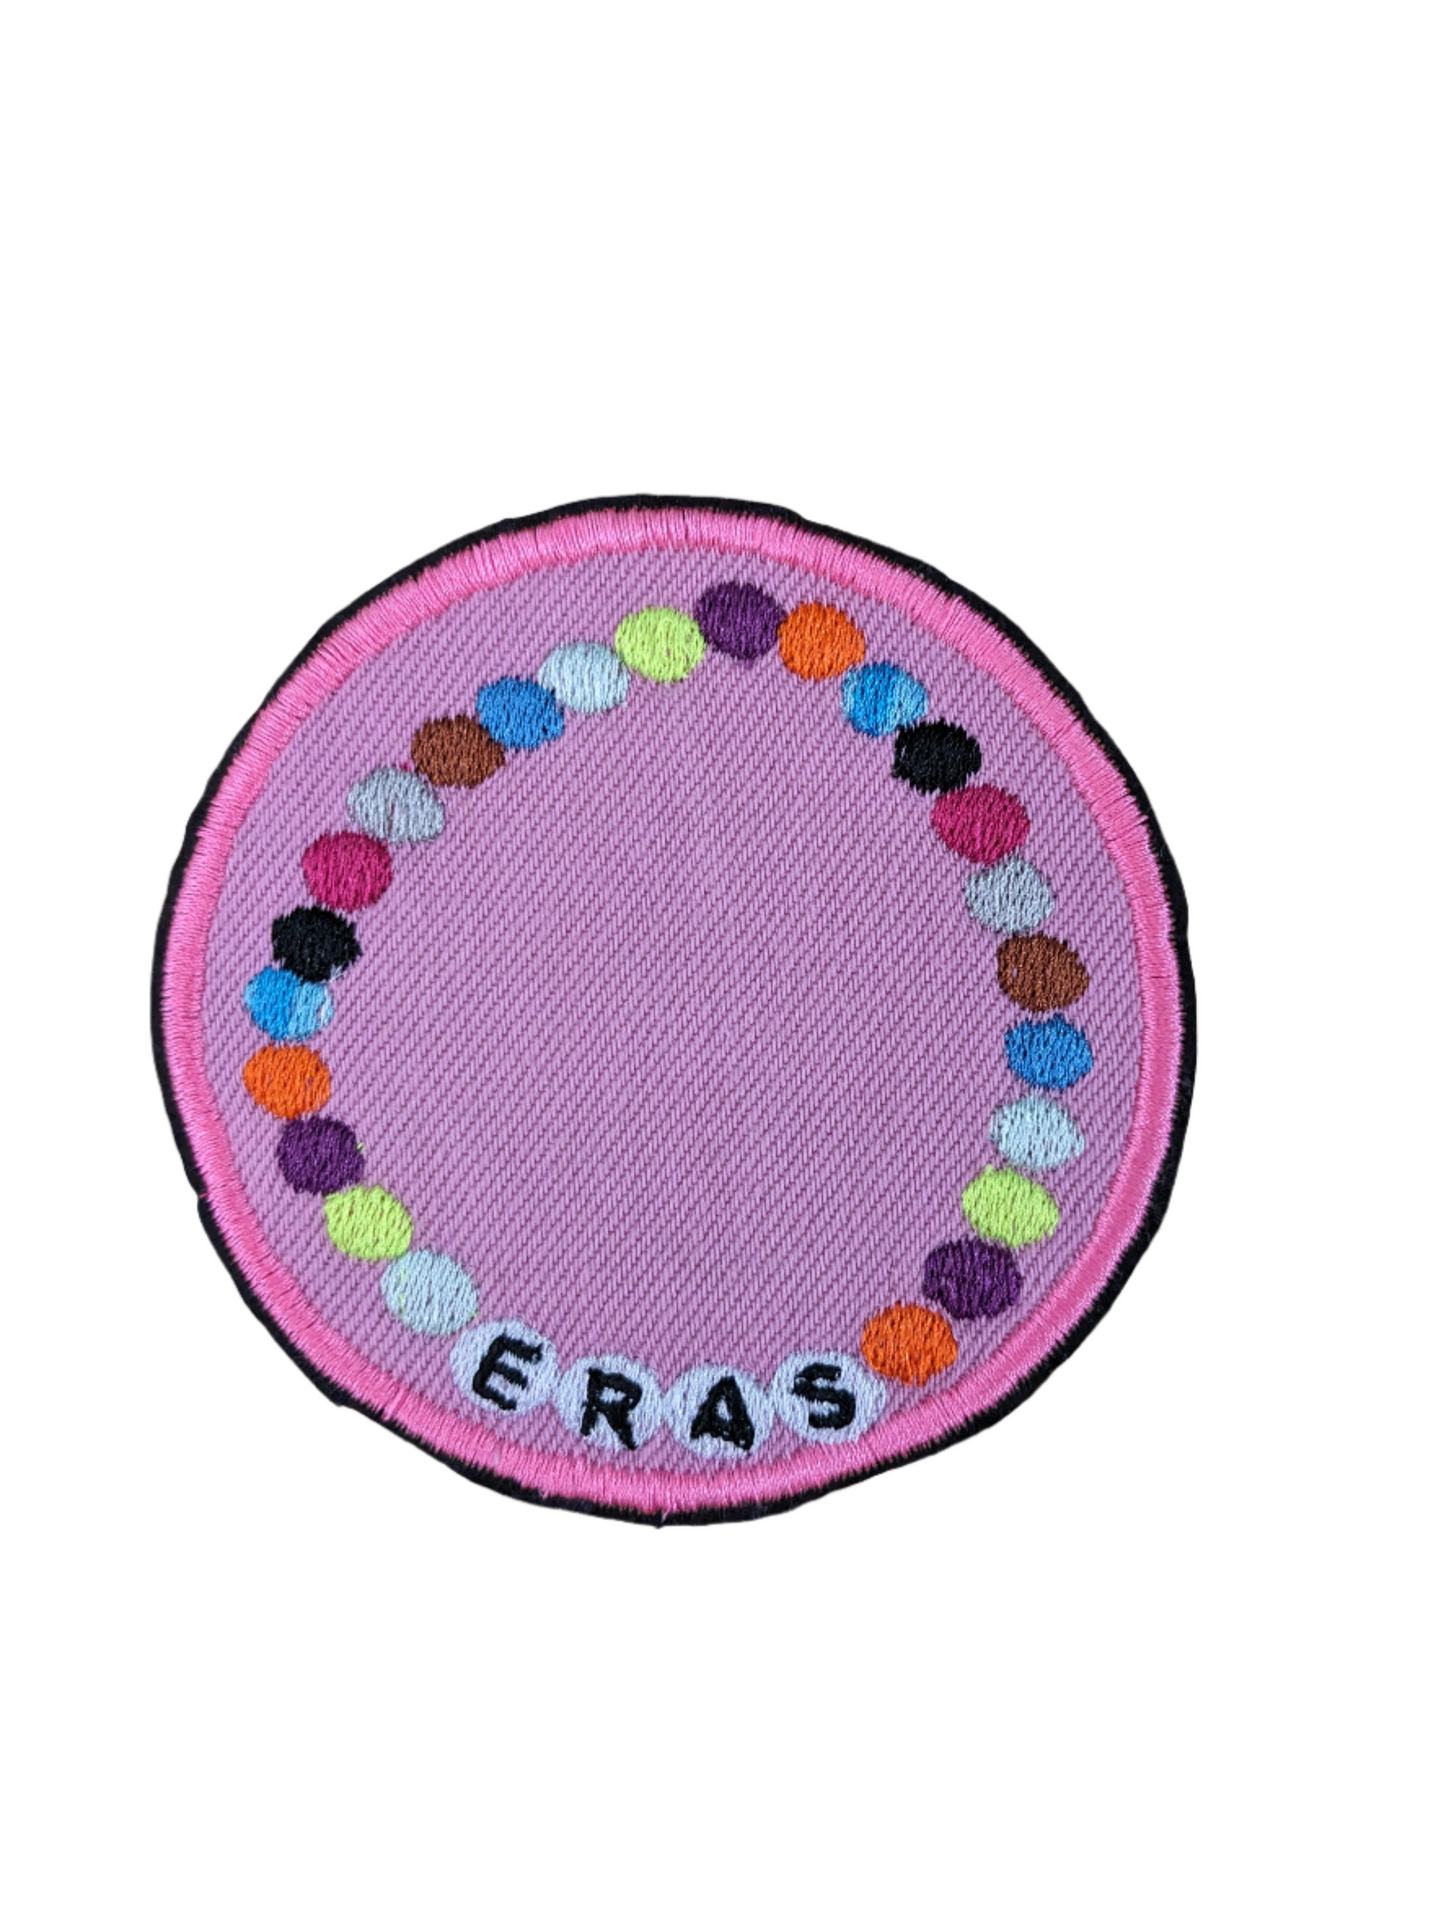 Bright Pink Eras Bracelet Inspired Recycled Denim Patch - Perfect for Swifties - Rainbow Colour Thread -